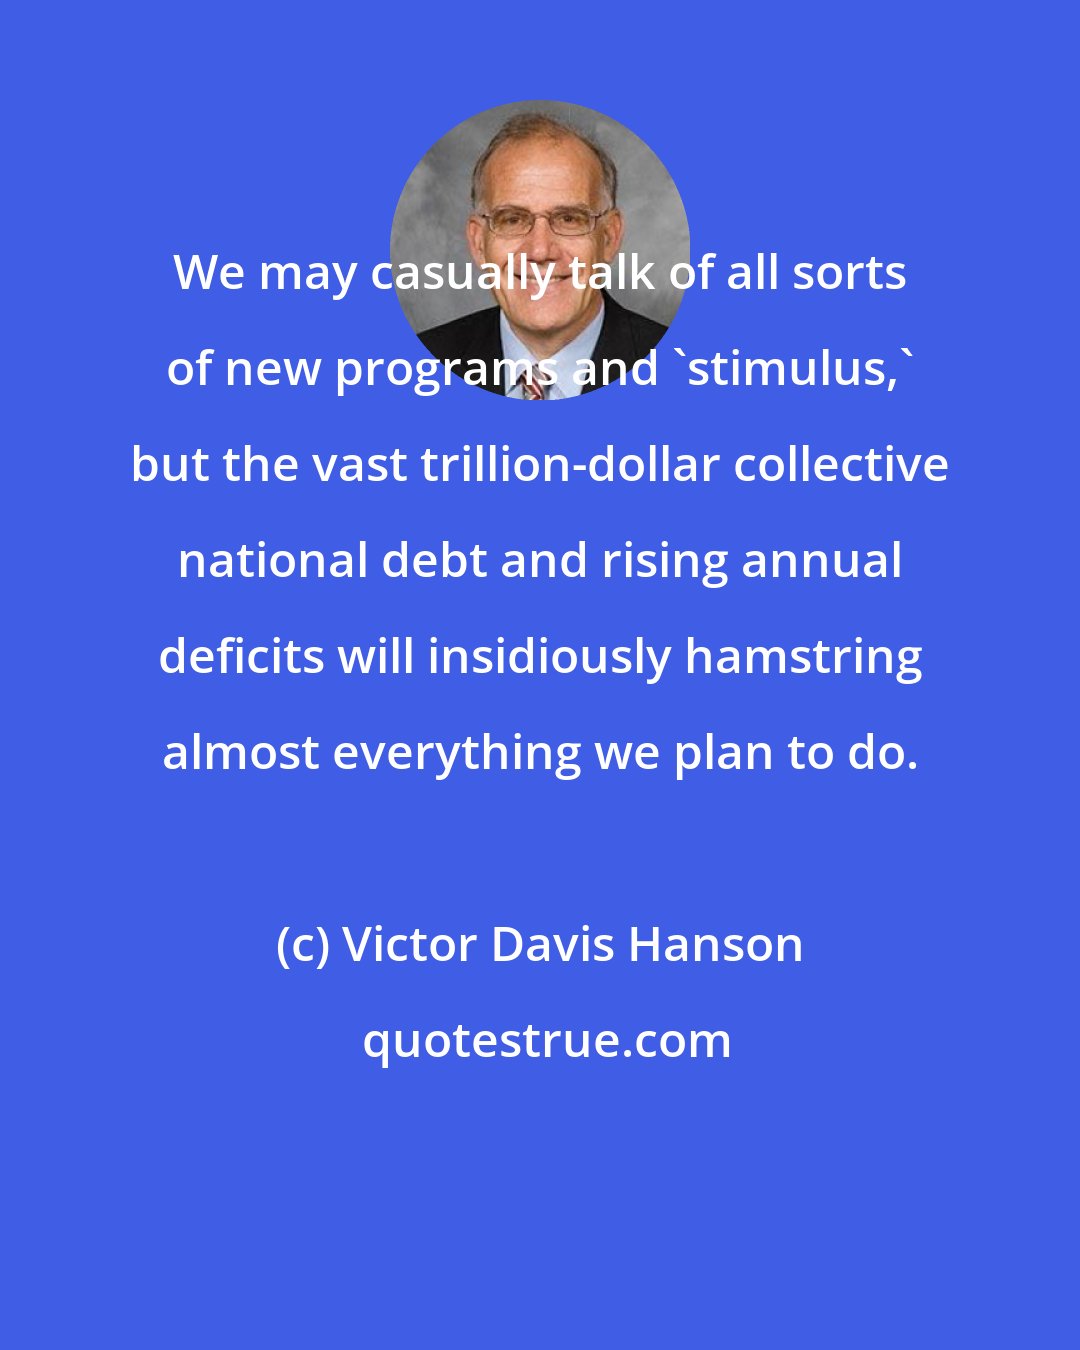 Victor Davis Hanson: We may casually talk of all sorts of new programs and 'stimulus,' but the vast trillion-dollar collective national debt and rising annual deficits will insidiously hamstring almost everything we plan to do.